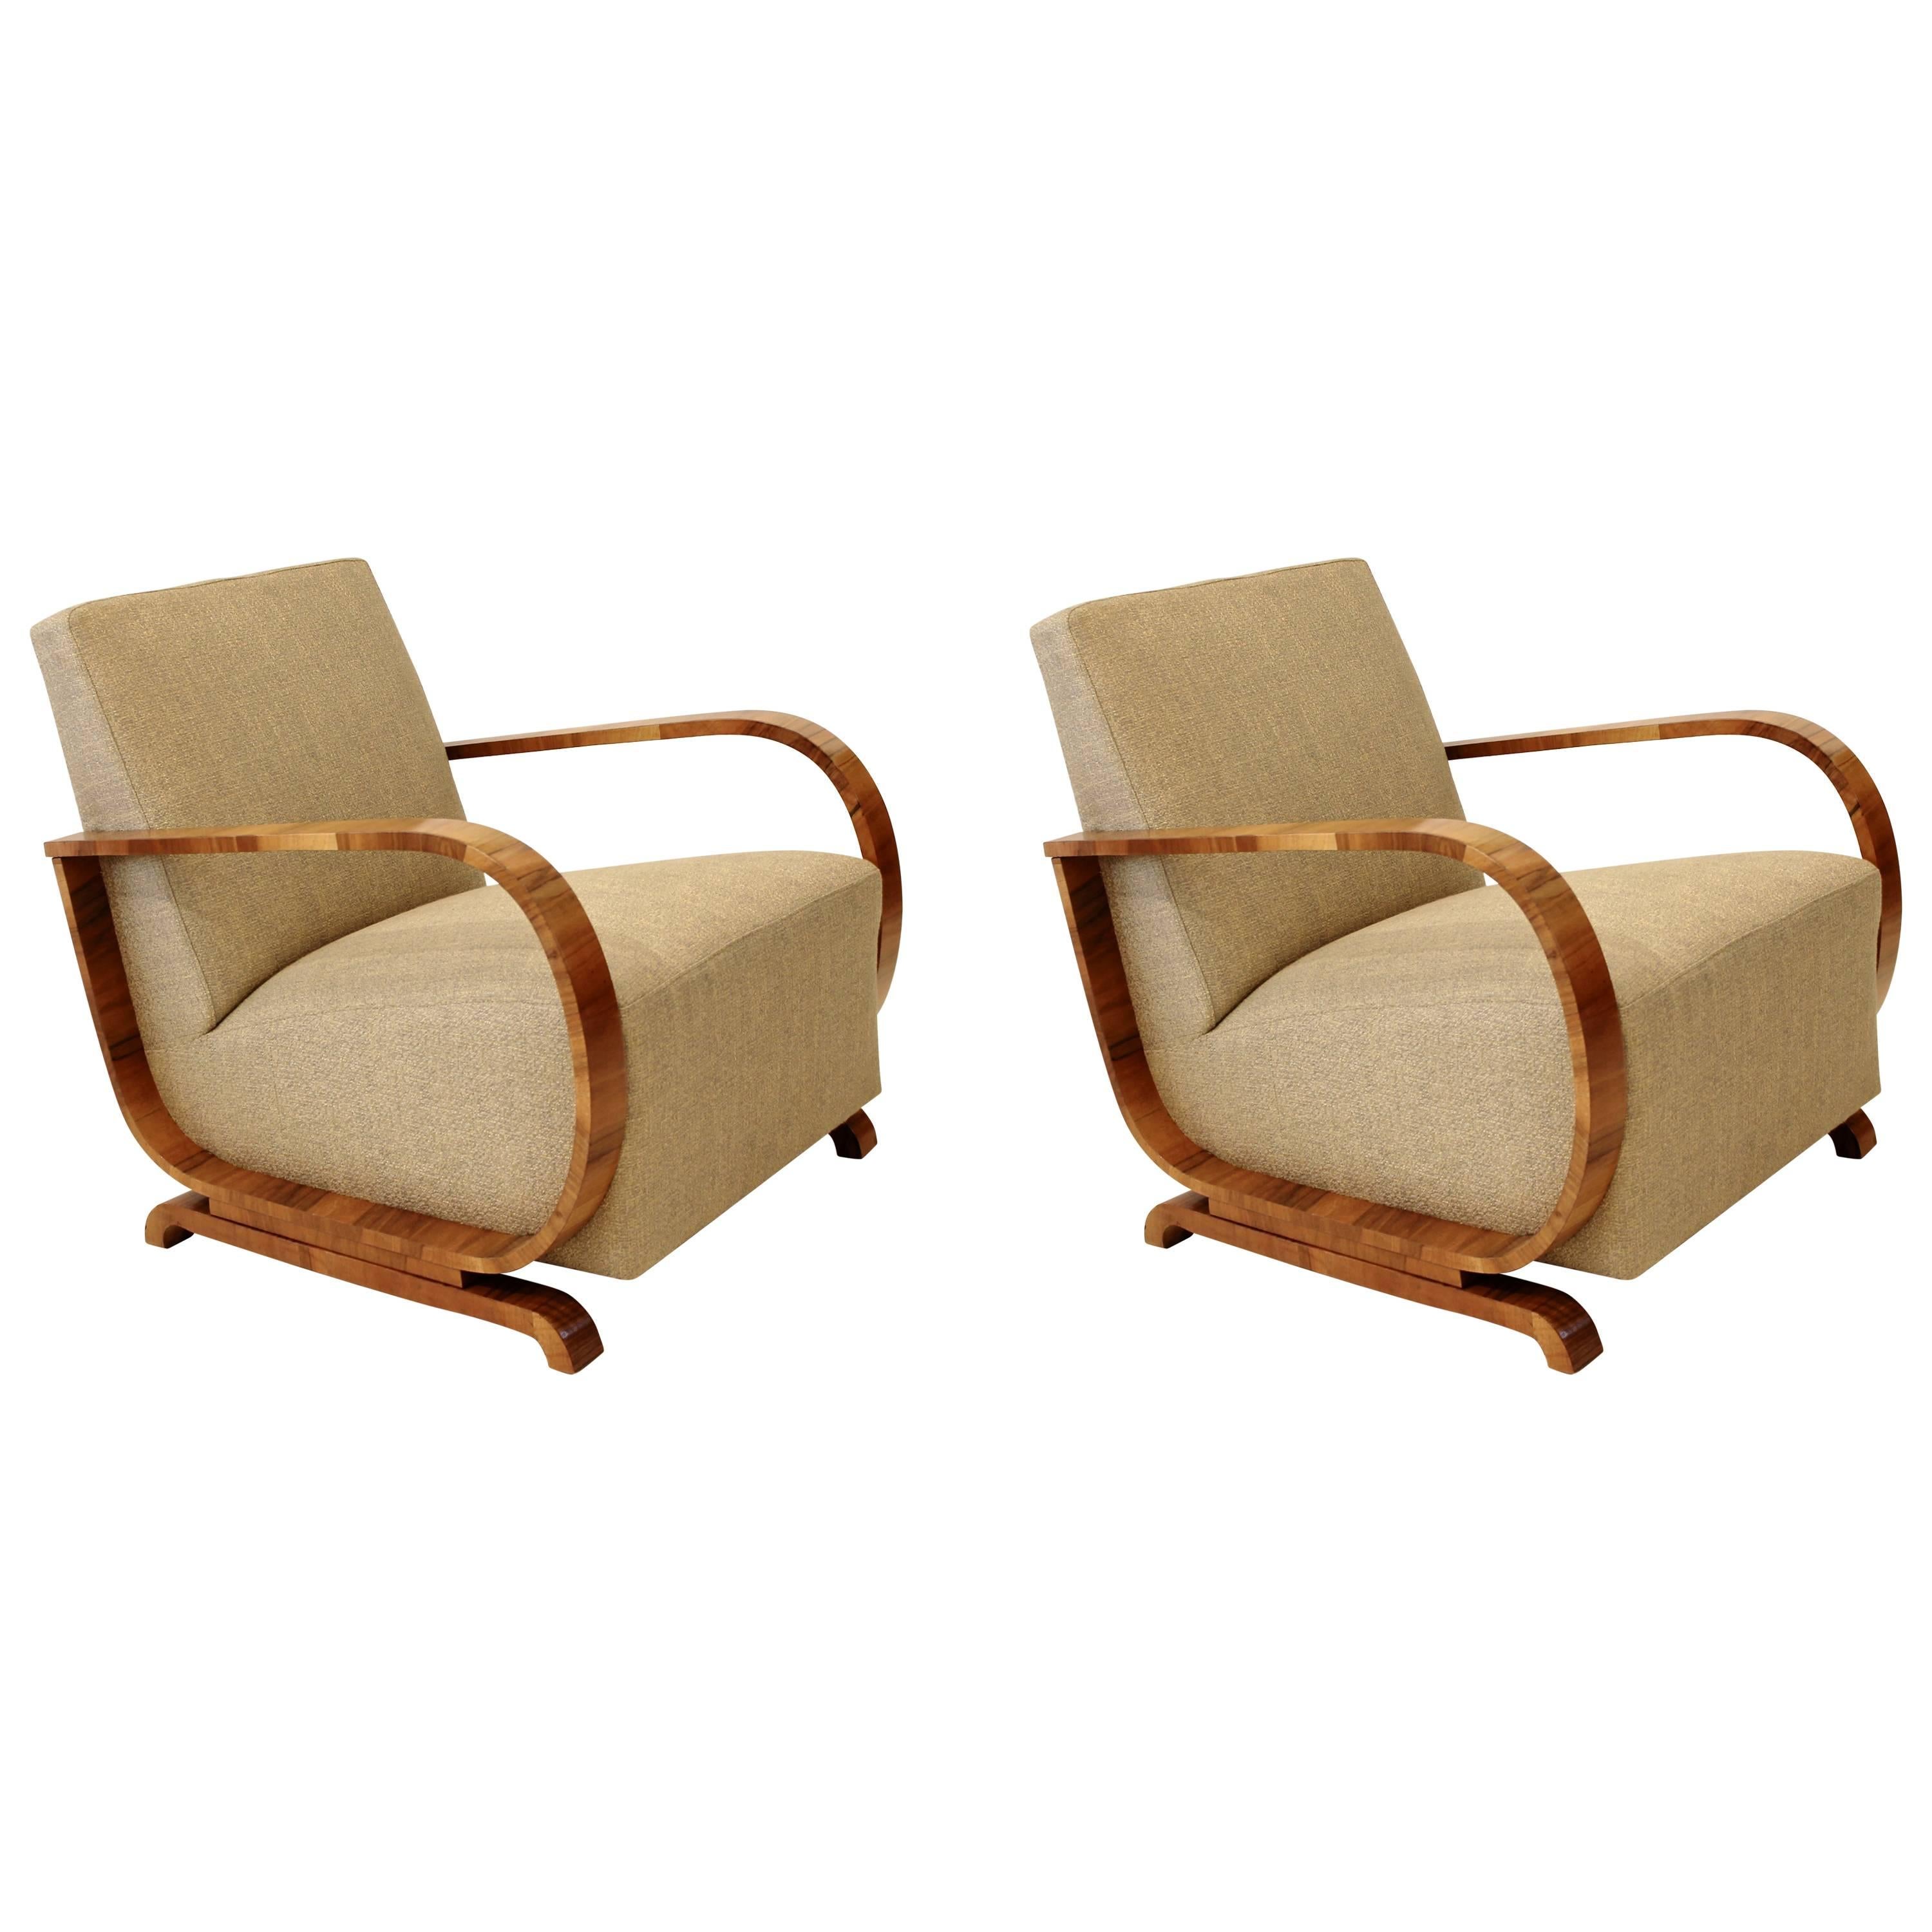 Pair of 1930s Art Deco Club Armchairs in Walnut and Pierre Frey Upholstery